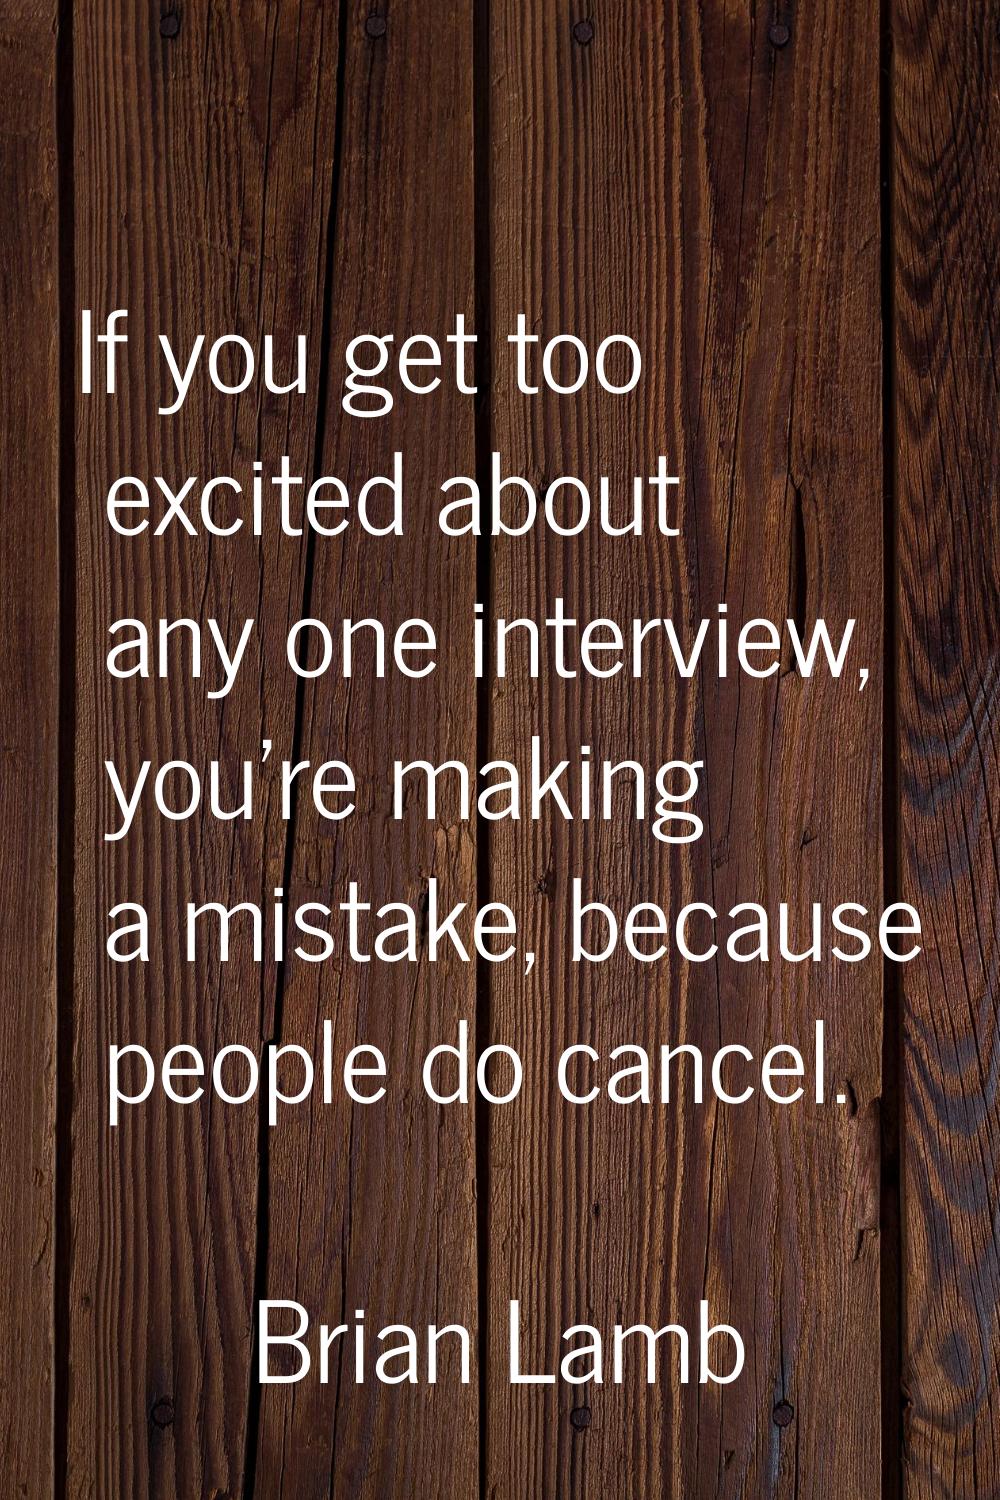 If you get too excited about any one interview, you're making a mistake, because people do cancel.